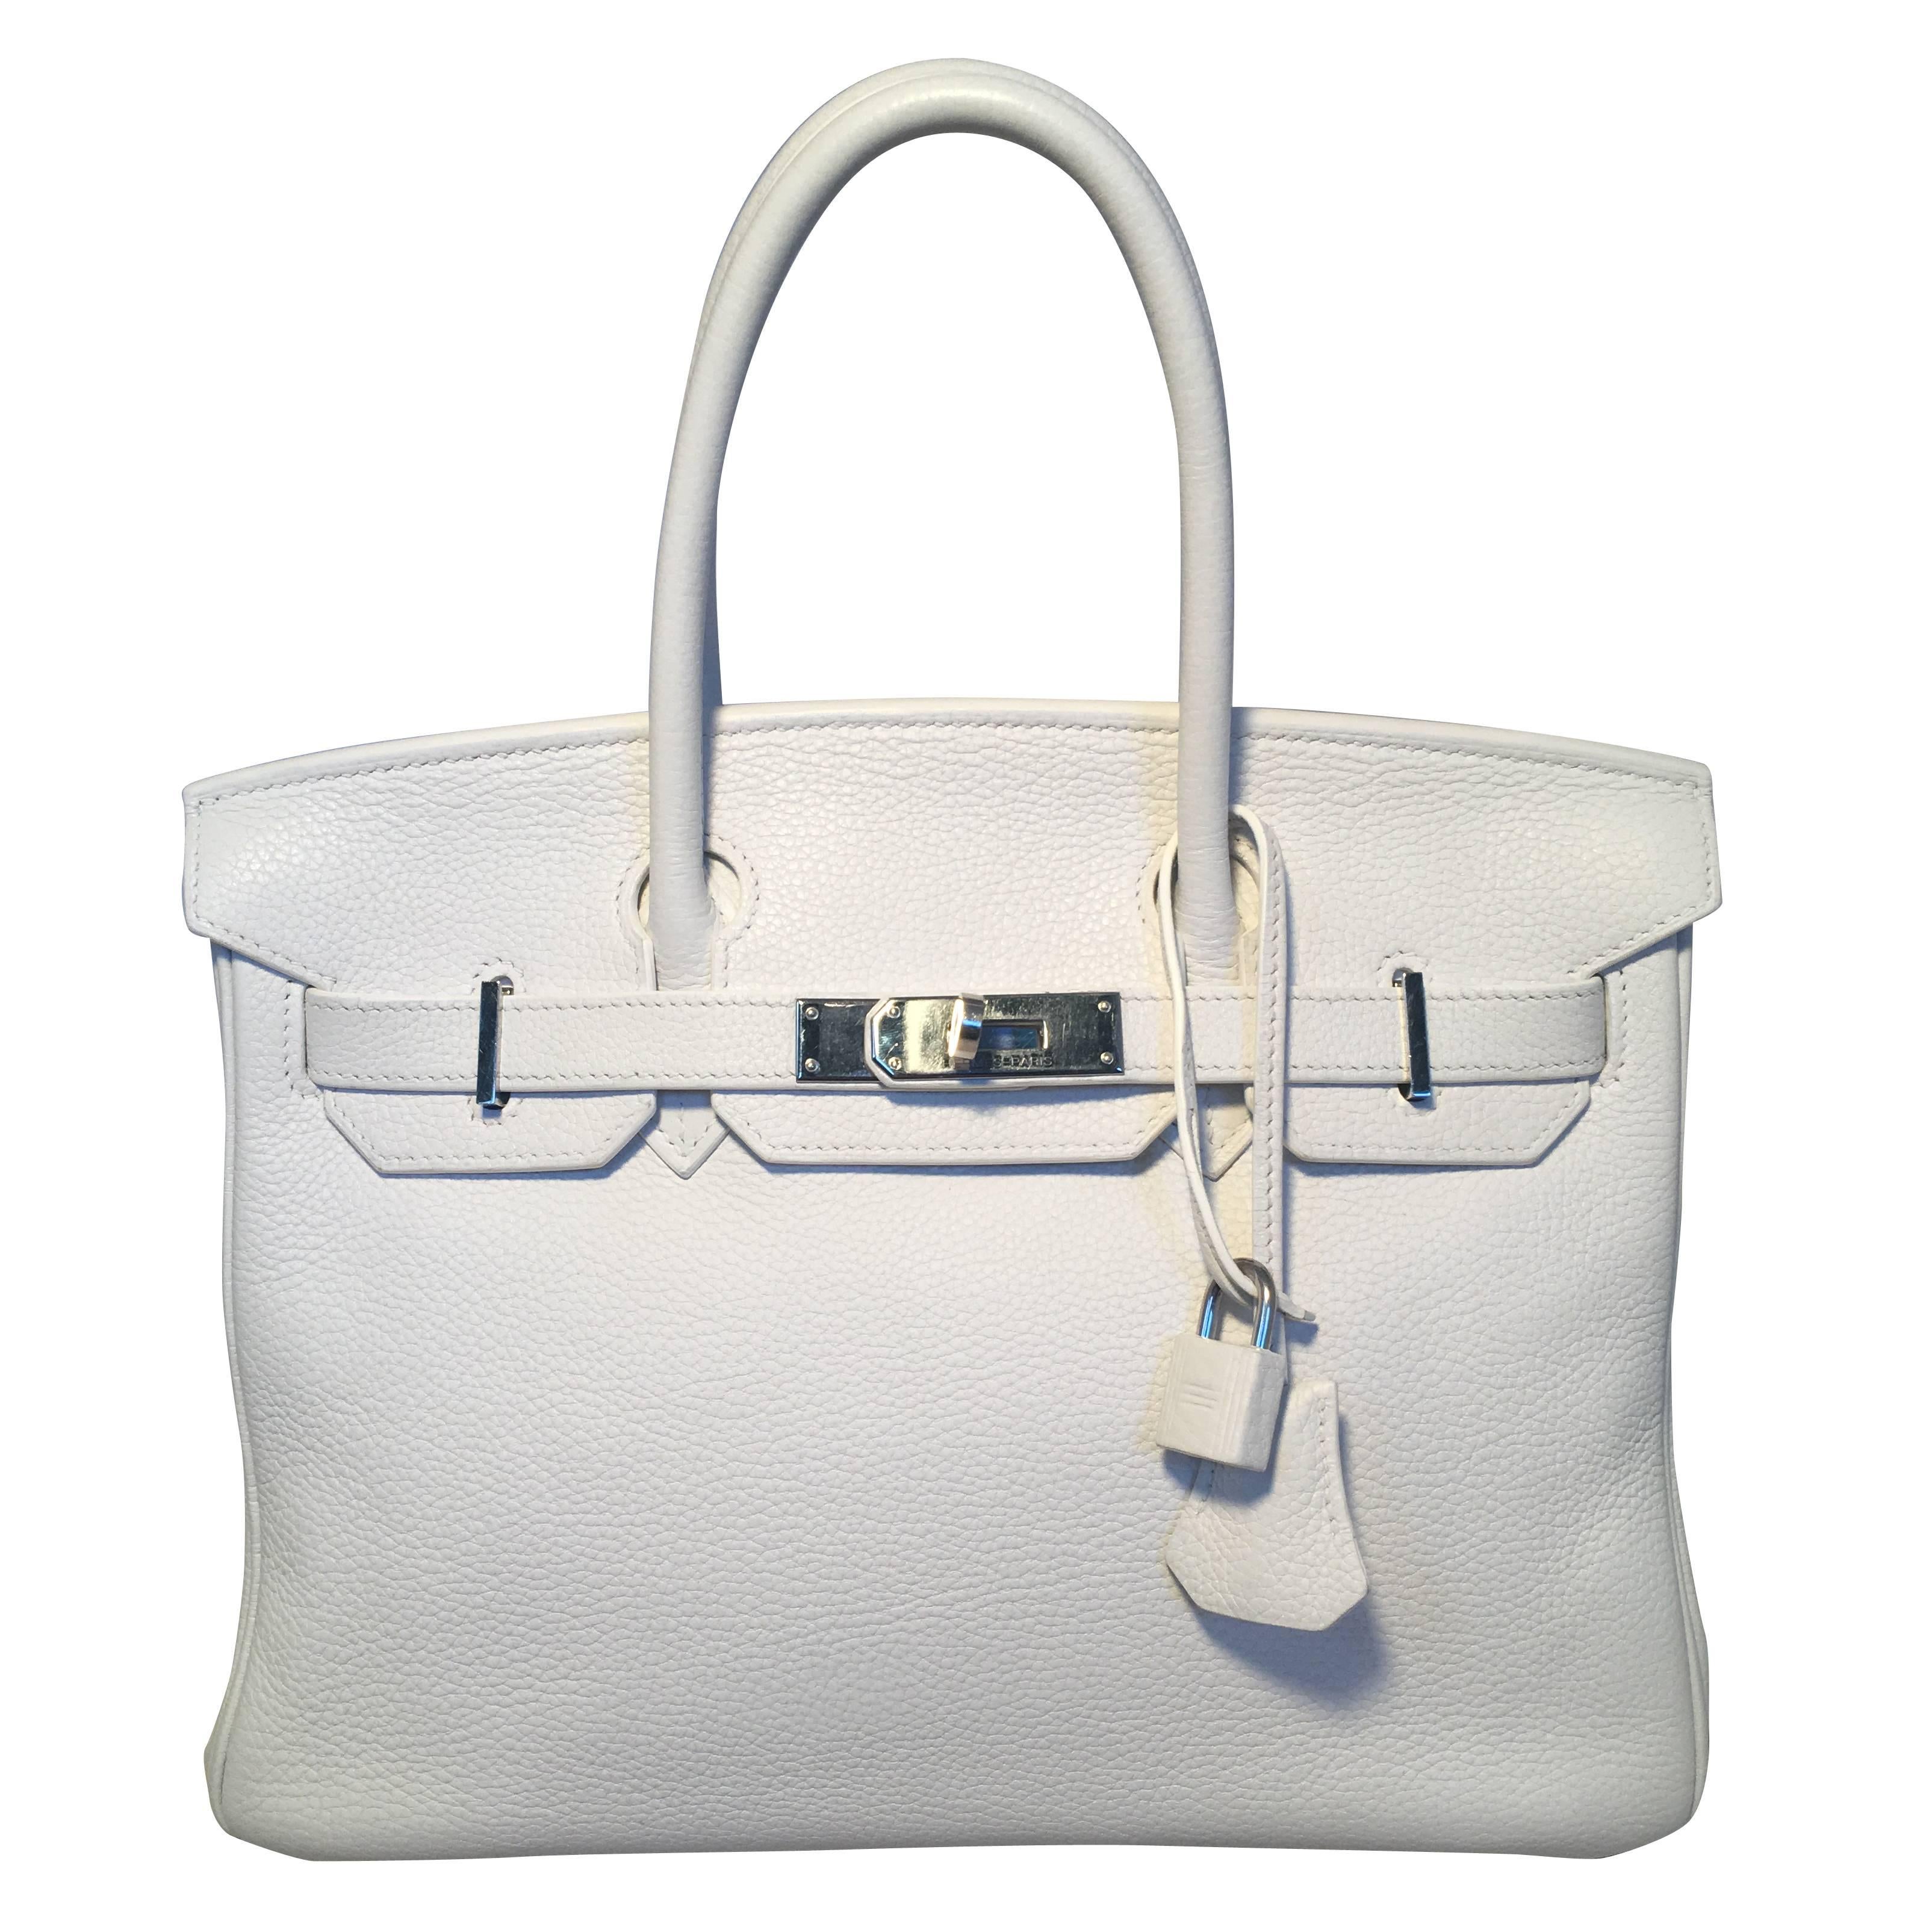 Gorgeous Hermes White Togo leather 30cm Birkin Bag in excellent condition.  White togo leather exterior trimmed with silver palladium hardware.  Front twist double strap closure opens to a white kidskin lined interior that holds the perfect amount